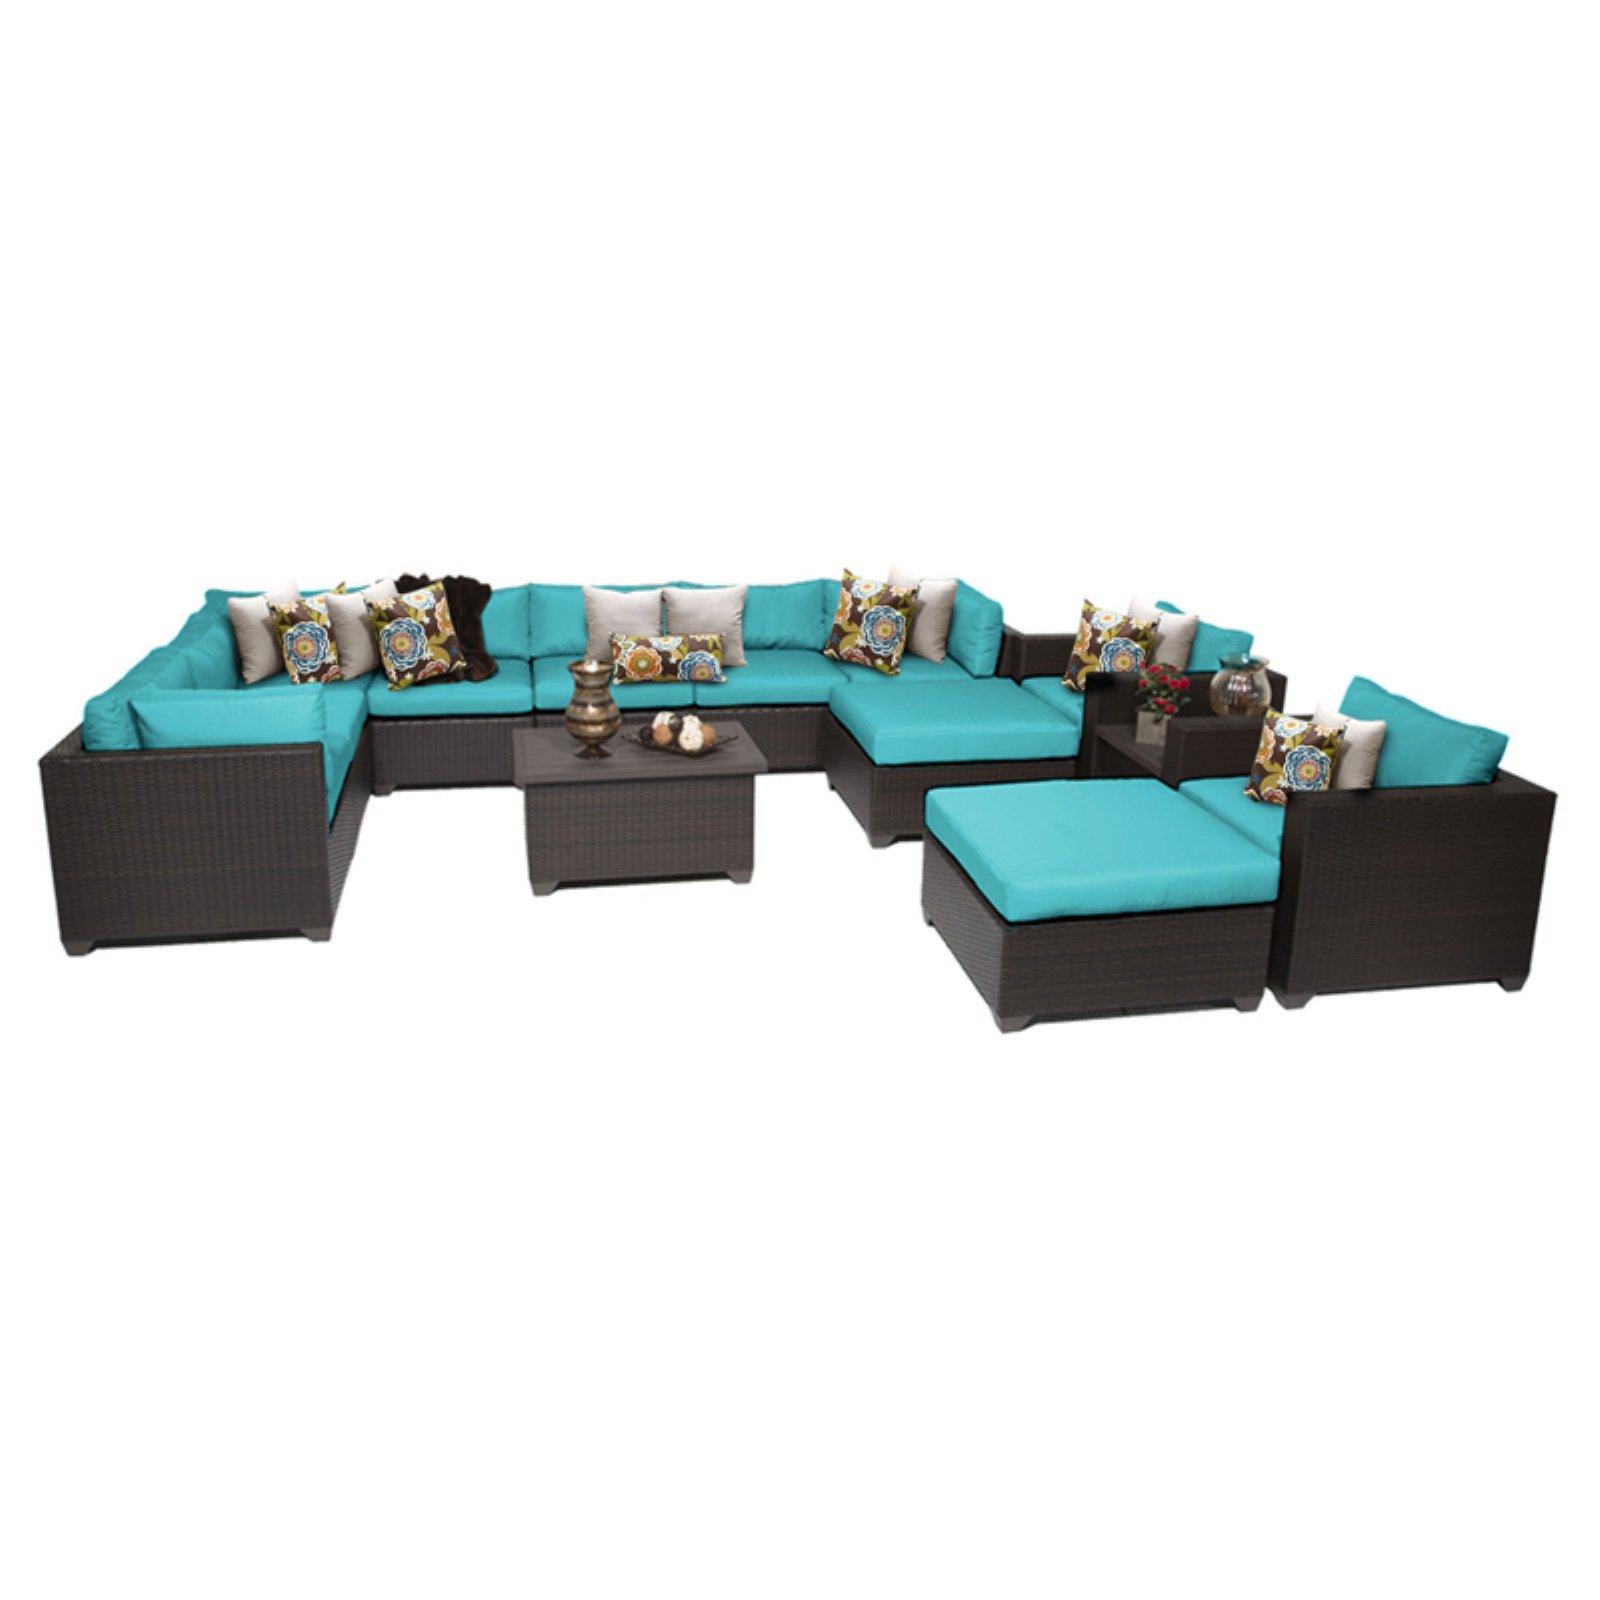 TK Classics Belle Wicker 13 Piece Patio Conversation Set with 2 Sets of Cushion Covers - image 2 of 2